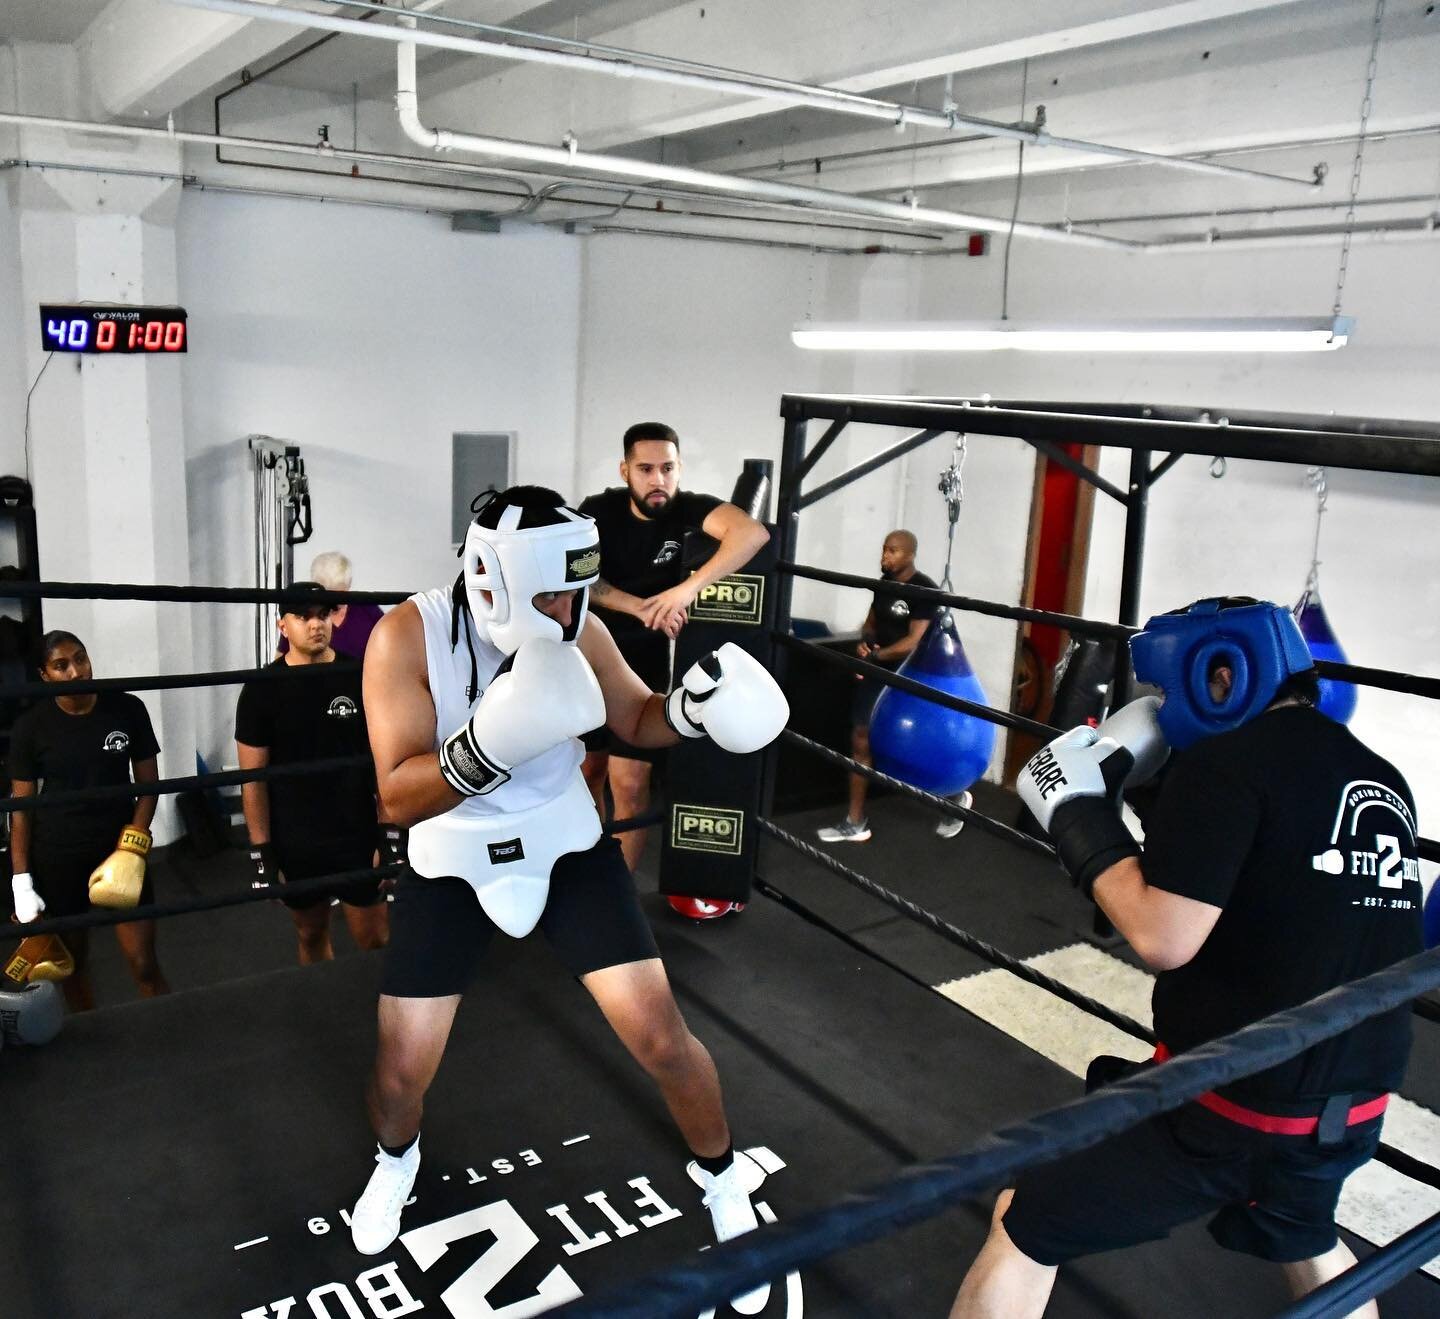 Sparring every Thursday 7:30 pm 

🚨 *MANDATORY for members* 🤣 if you know you know. 
You&rsquo;ve been warned. 

📸 @ds_sportsmedia 
&bull;
&bull;
#boxing #industrycity #sunsetpark #boxeo #brooklyn #sparring